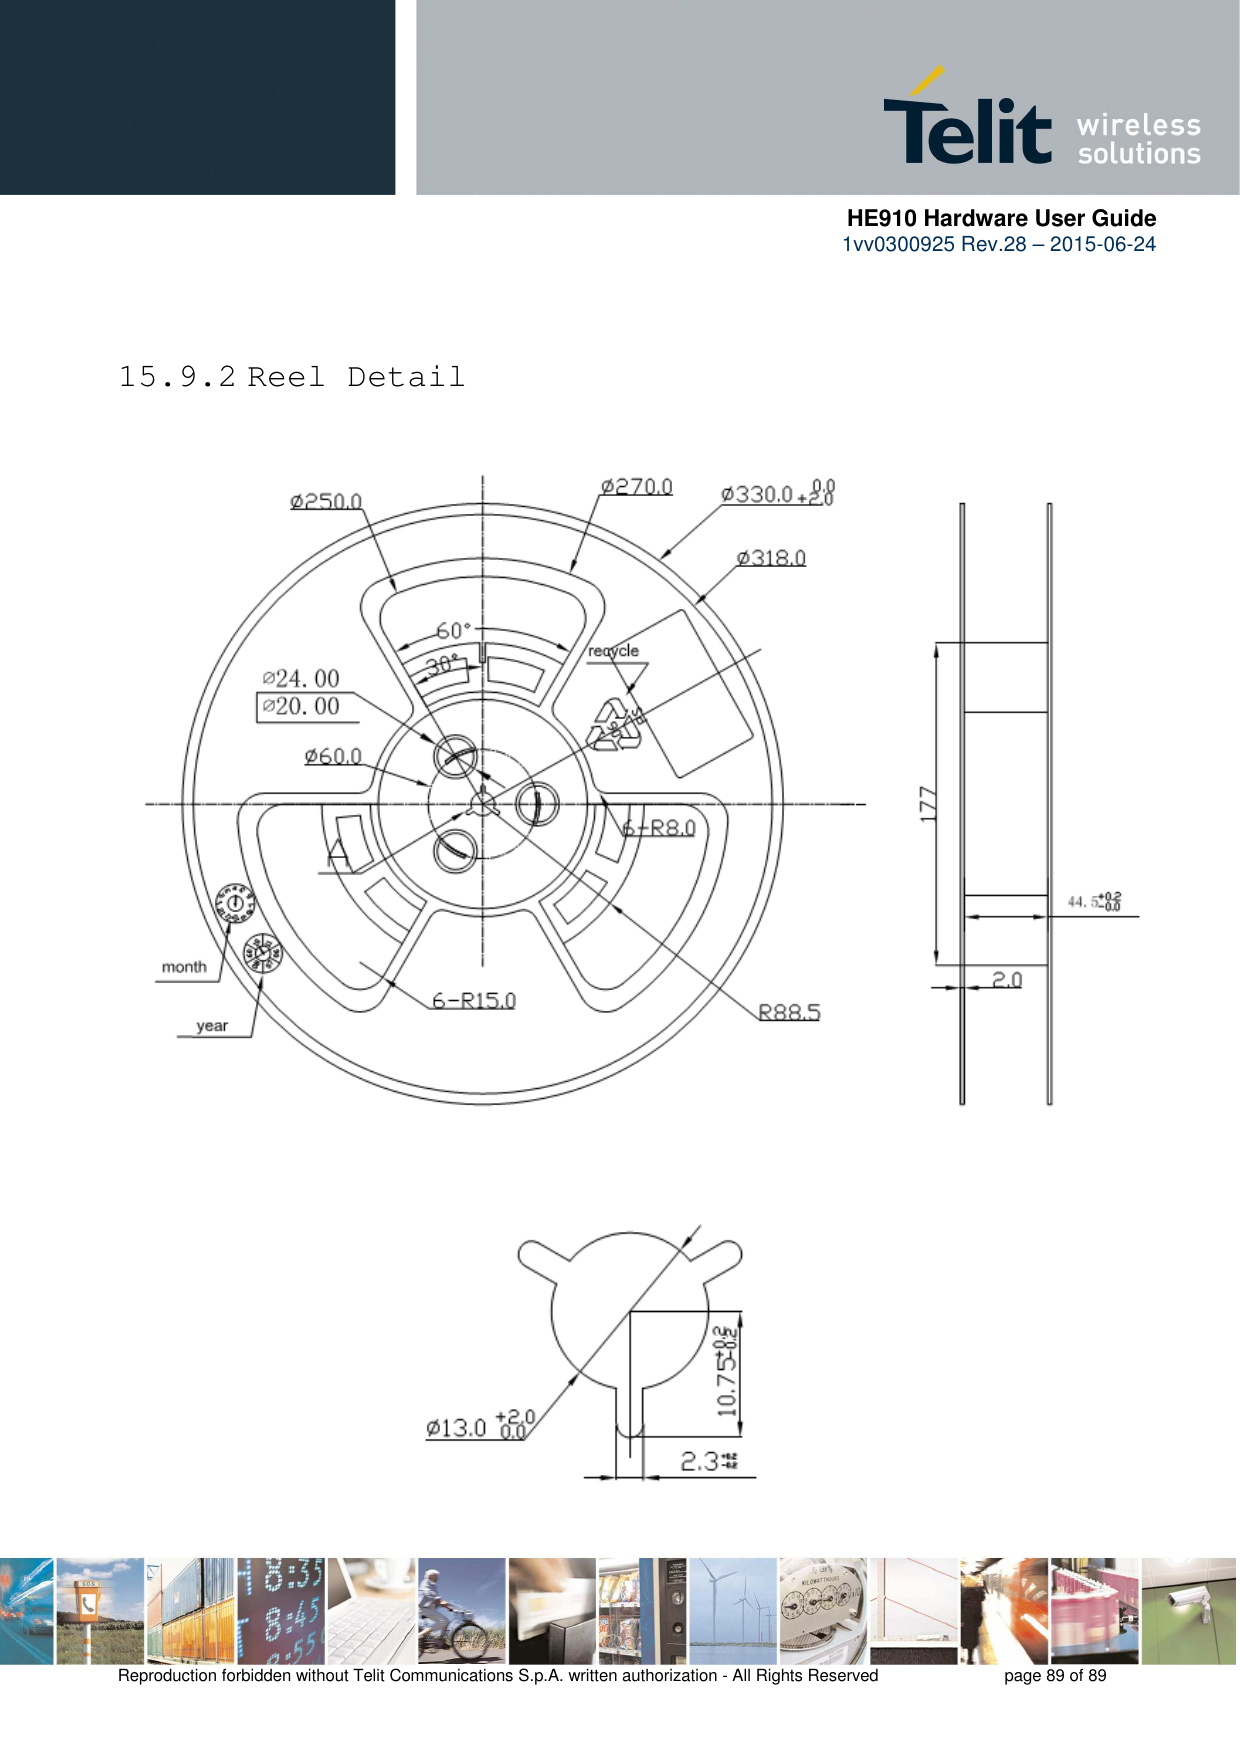      HE910 Hardware User Guide 1vv0300925 Rev.28 – 2015-06-24    Reproduction forbidden without Telit Communications S.p.A. written authorization - All Rights Reserved    page 89 of 89    15.9.2 Reel Detail                                            